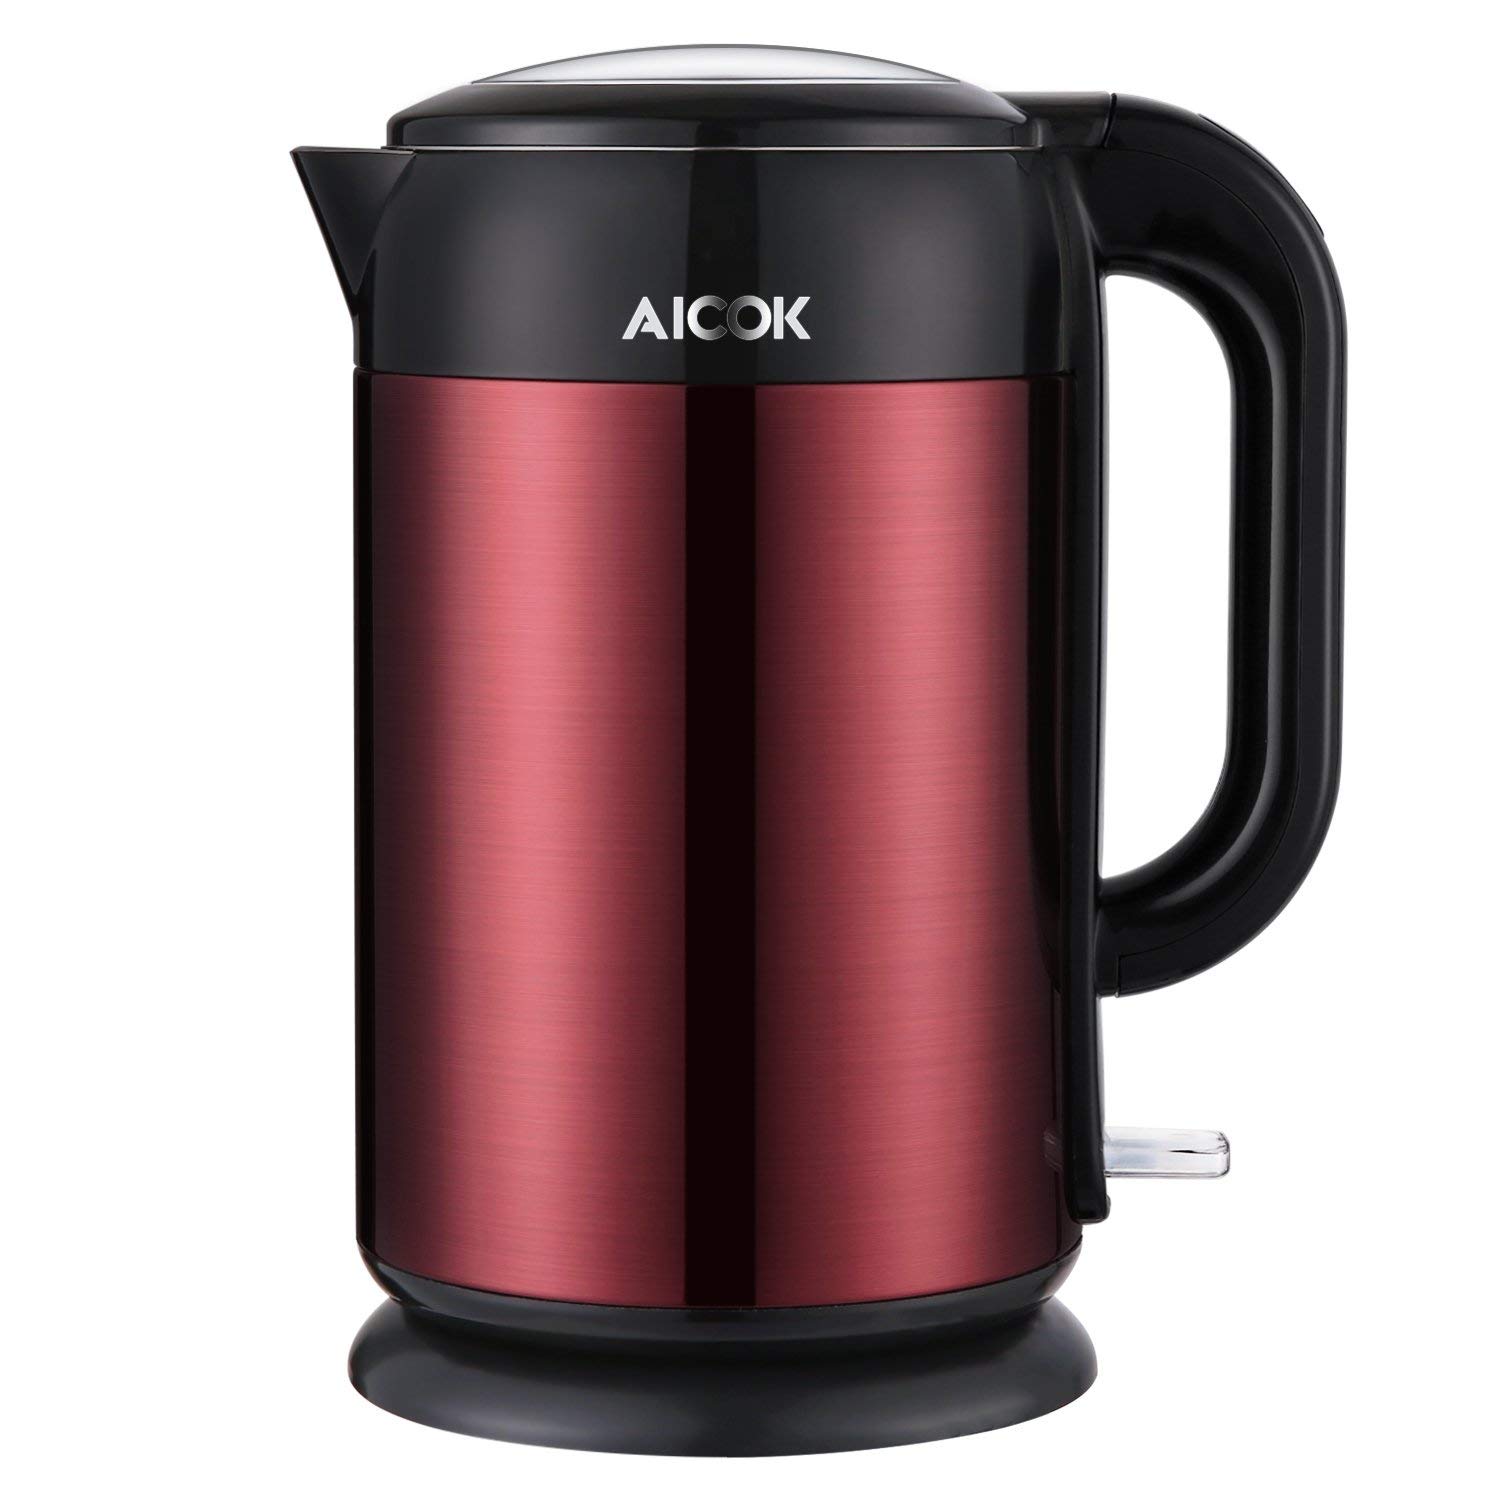 Aicok Electric Kettle, Double Wall Stainless Steel, Fast and Safe ...